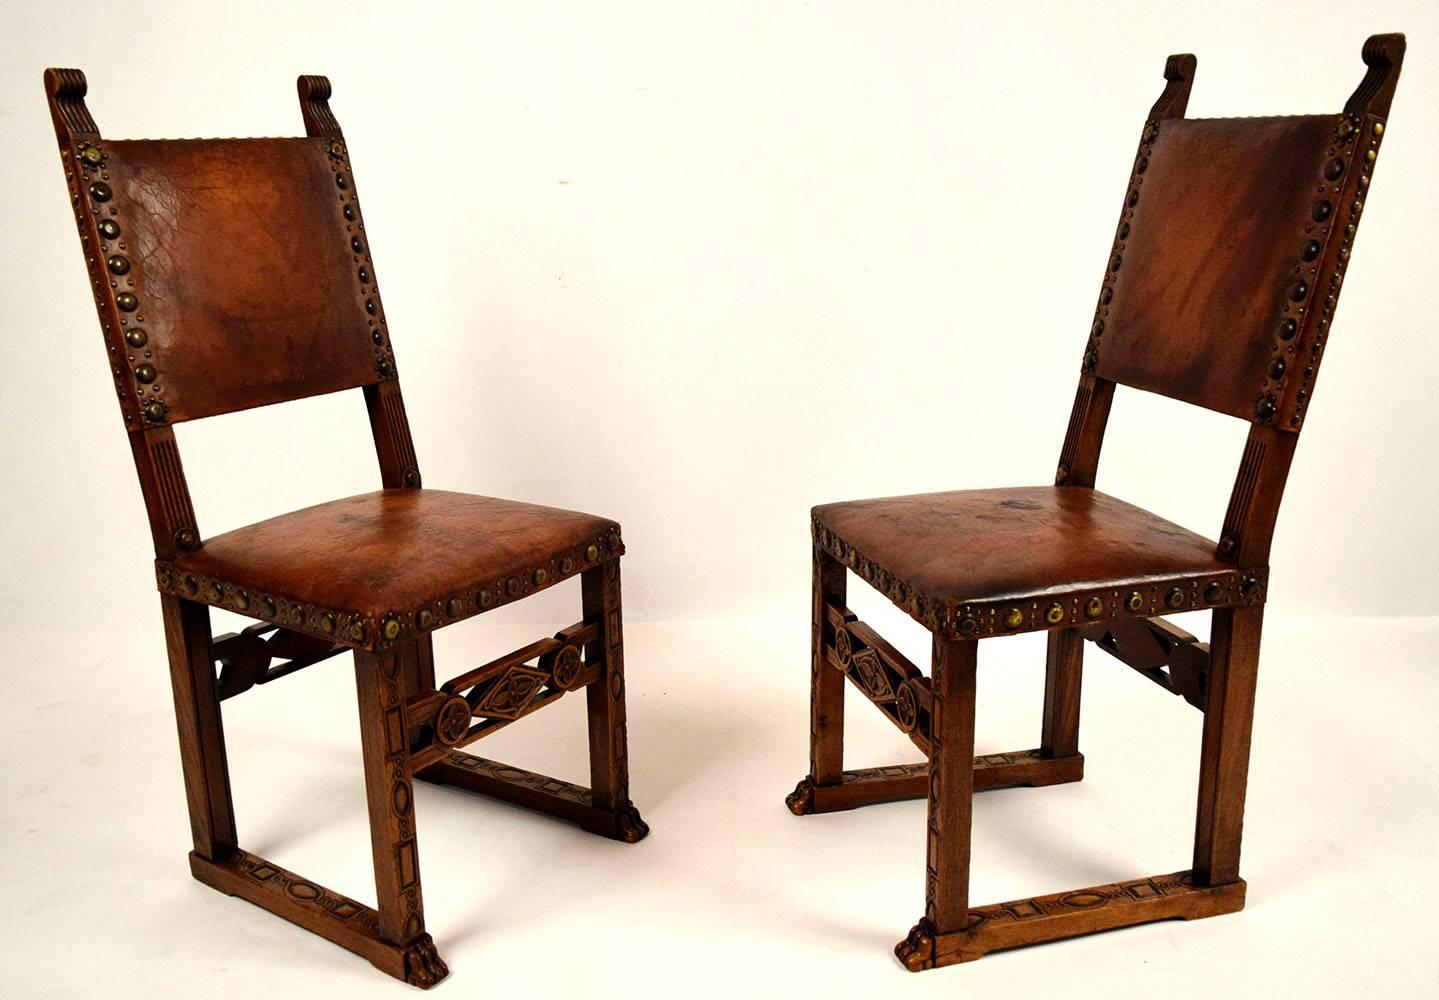 Set of six antique Spanish revival dining chairs. Oakwood frames with original dark walnut finish. Carvings throughout the frame and engraving wood on the stretched legs. Back and seat are upholstered with original distressed leather with nail-head